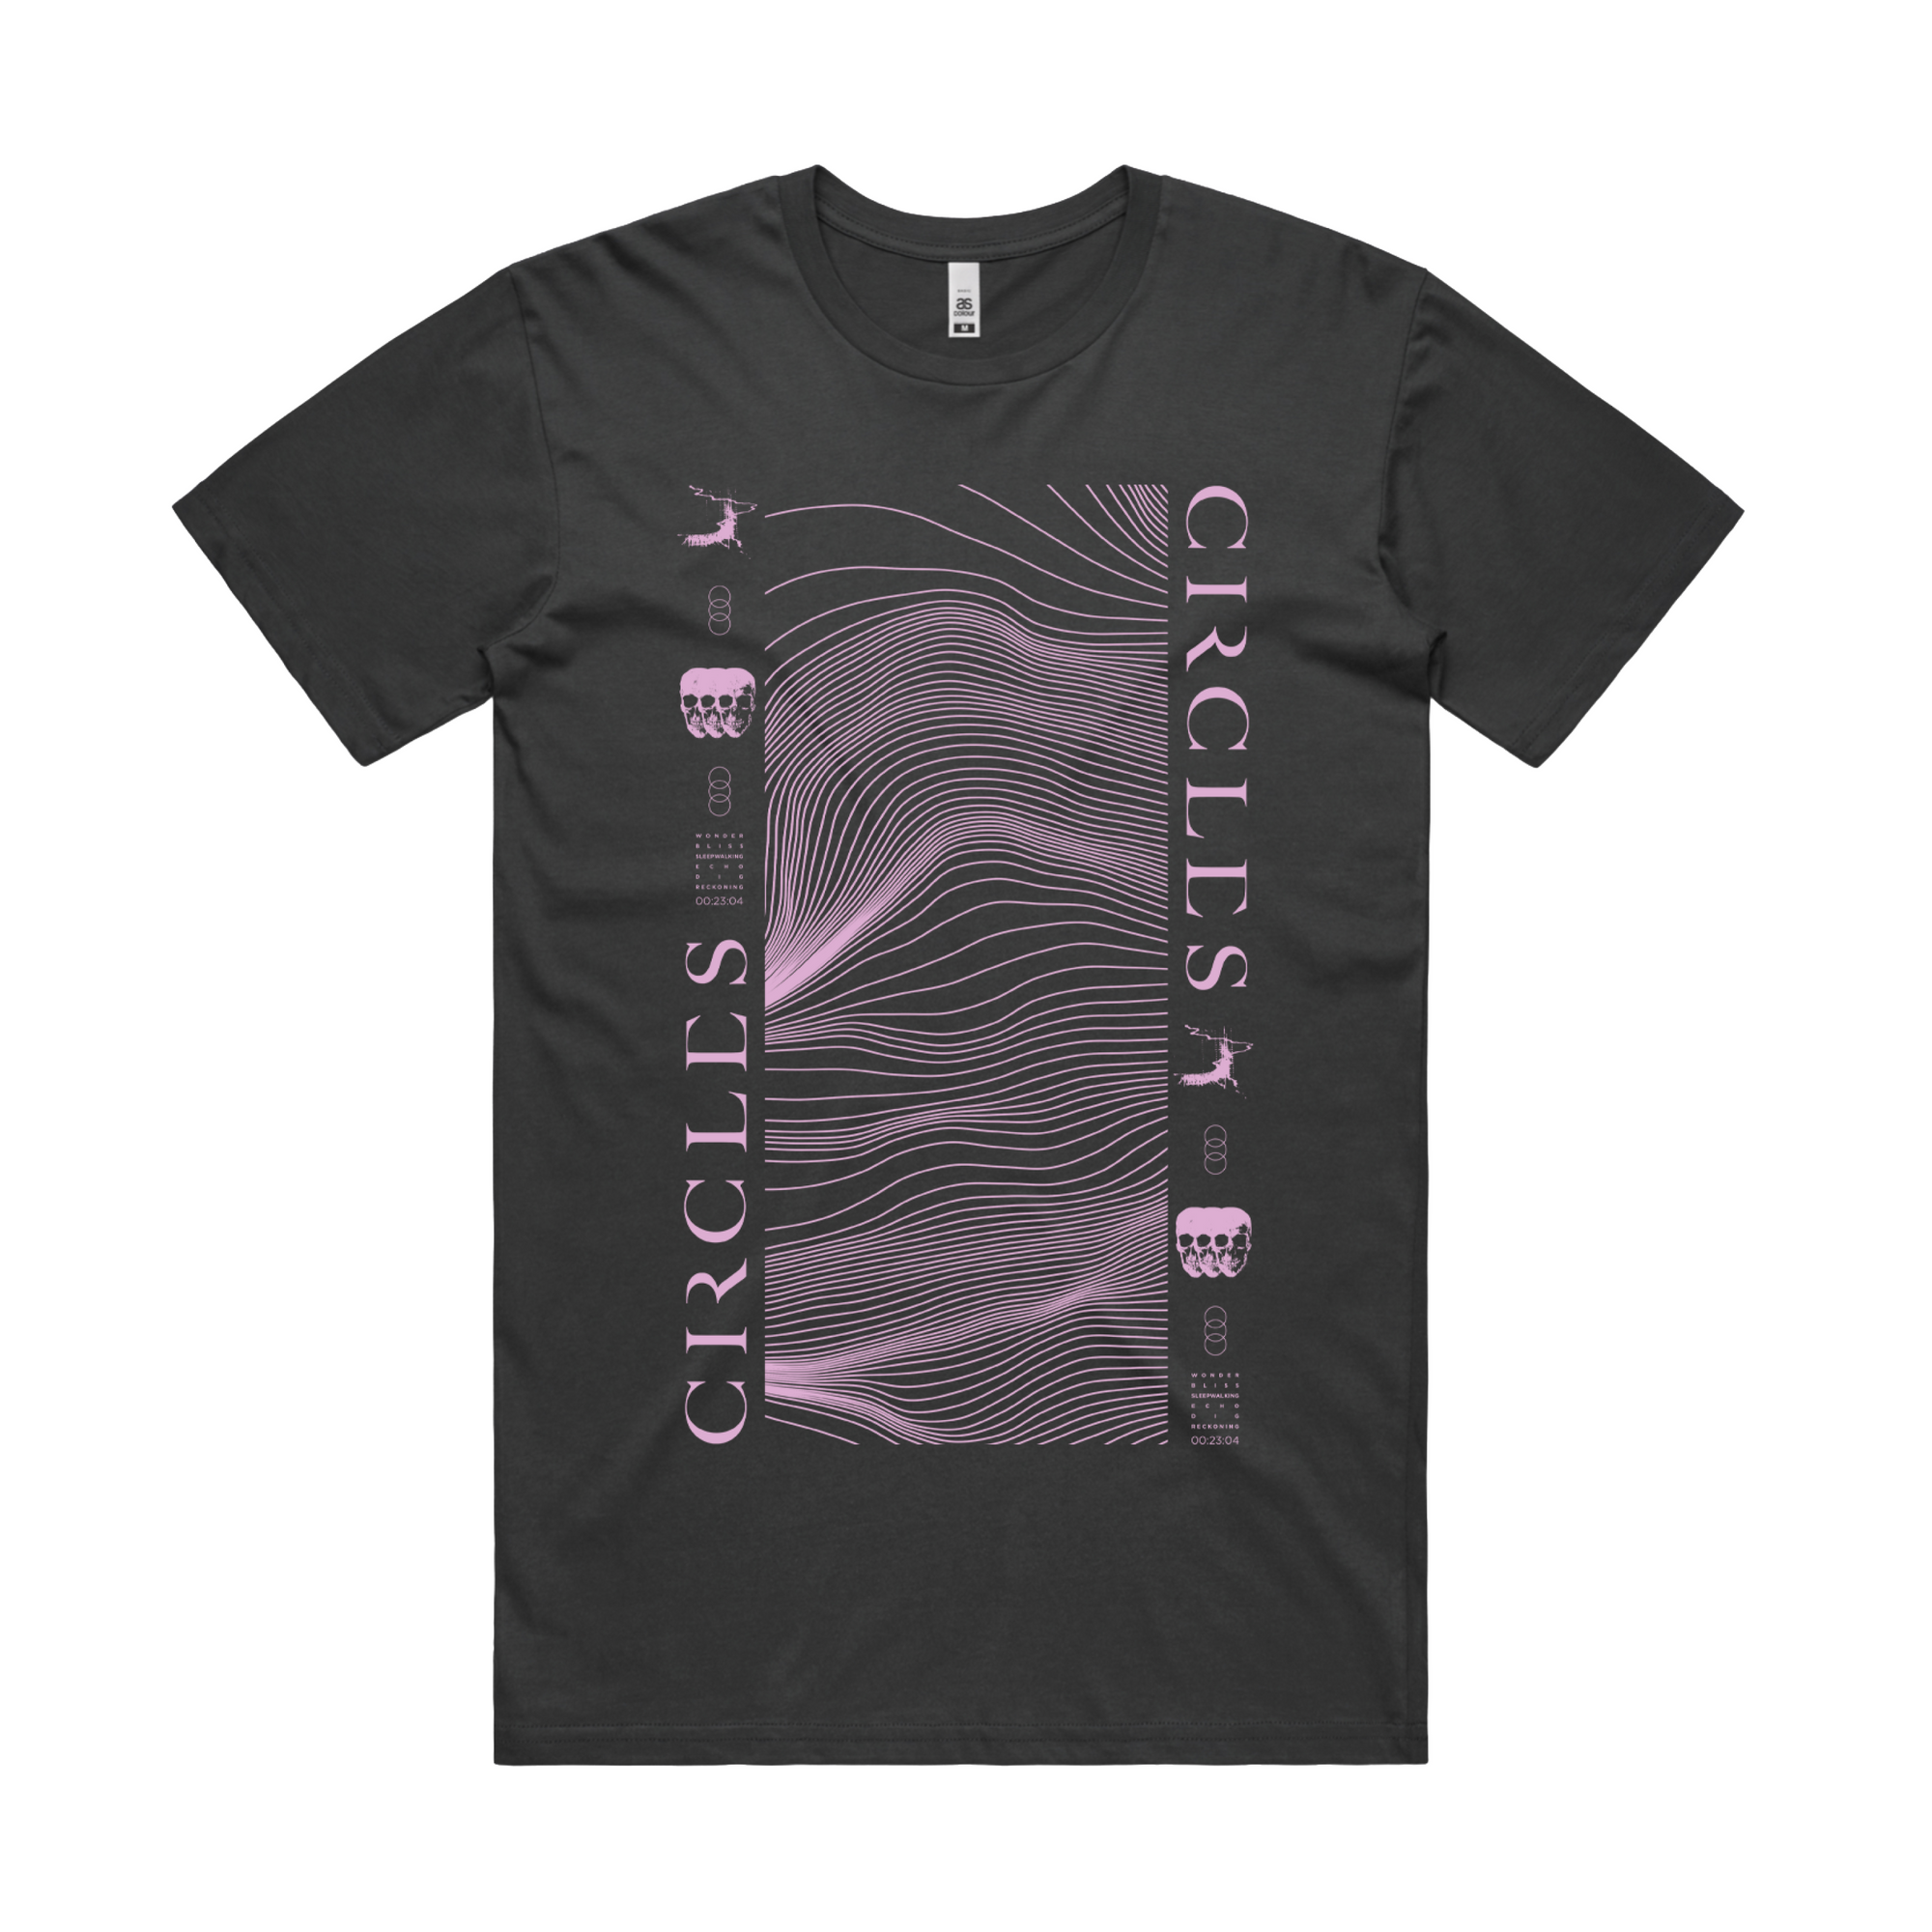 CIRCLES // THE STORIES WE ARE AFRAID OF | VOL.1 - SPECTRUM BLACK T-SHIRT